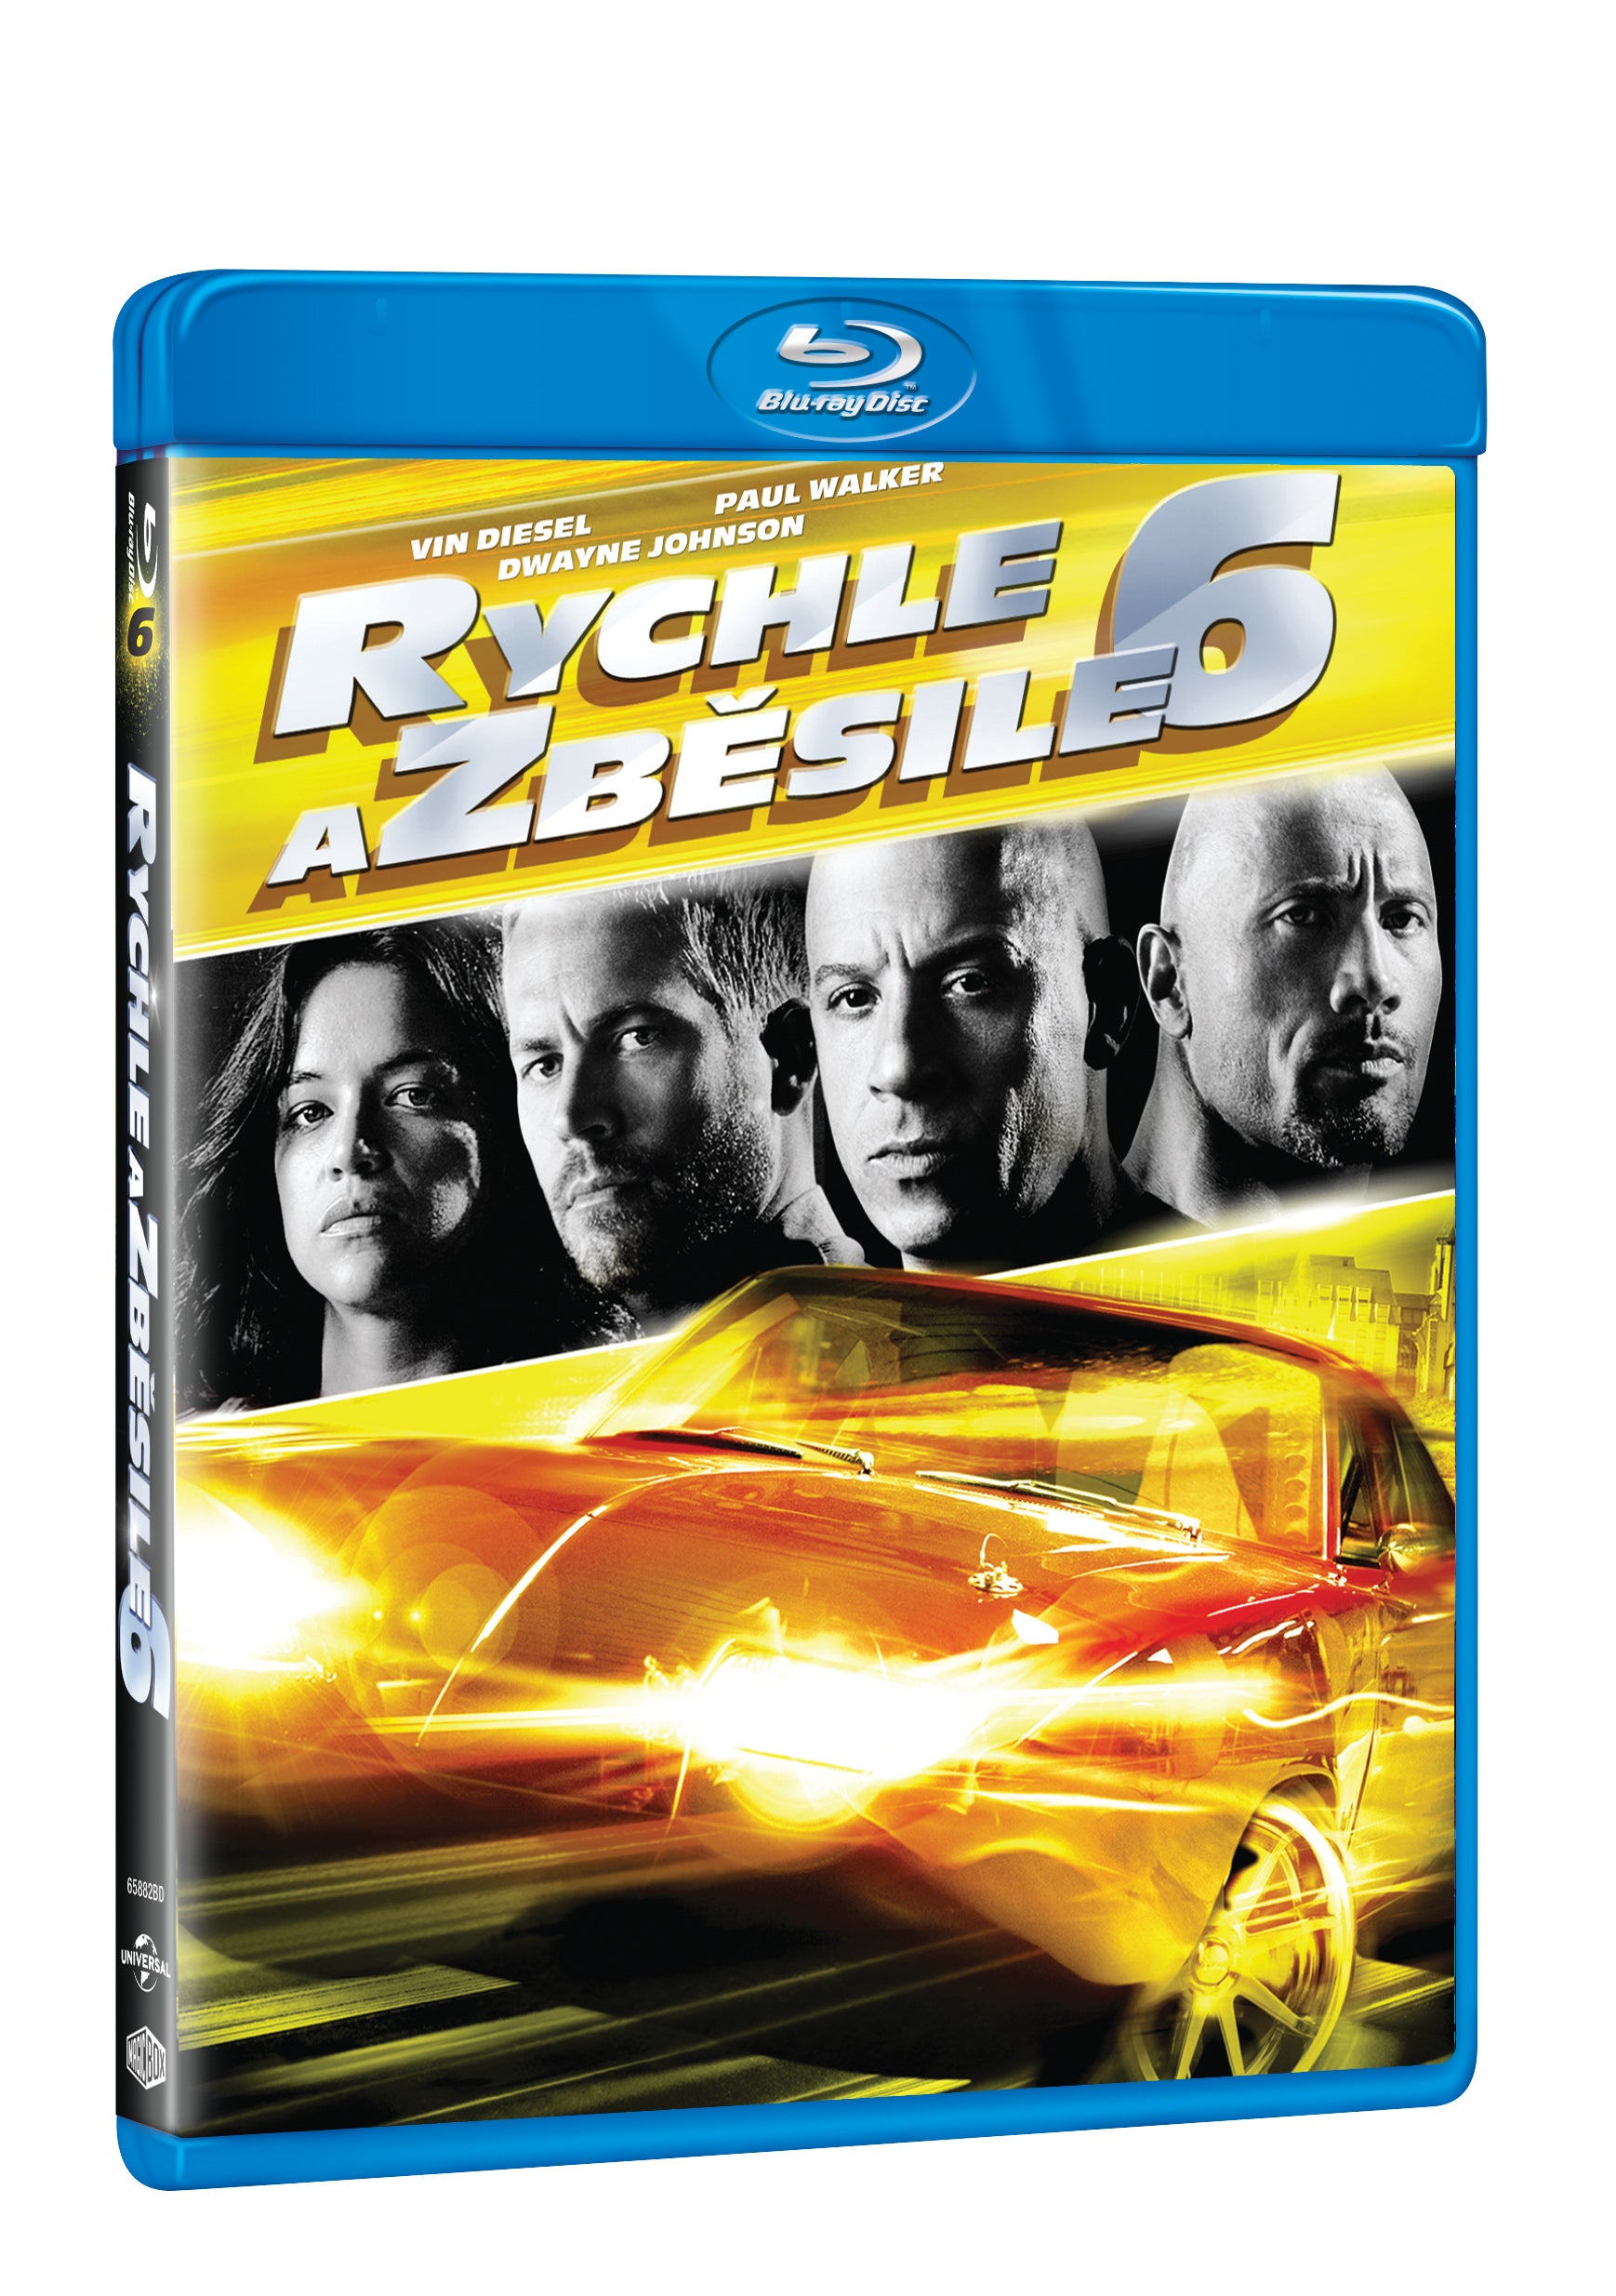 Rychle a zbesile 6 BD / Fast & Furious 6 - Czech version